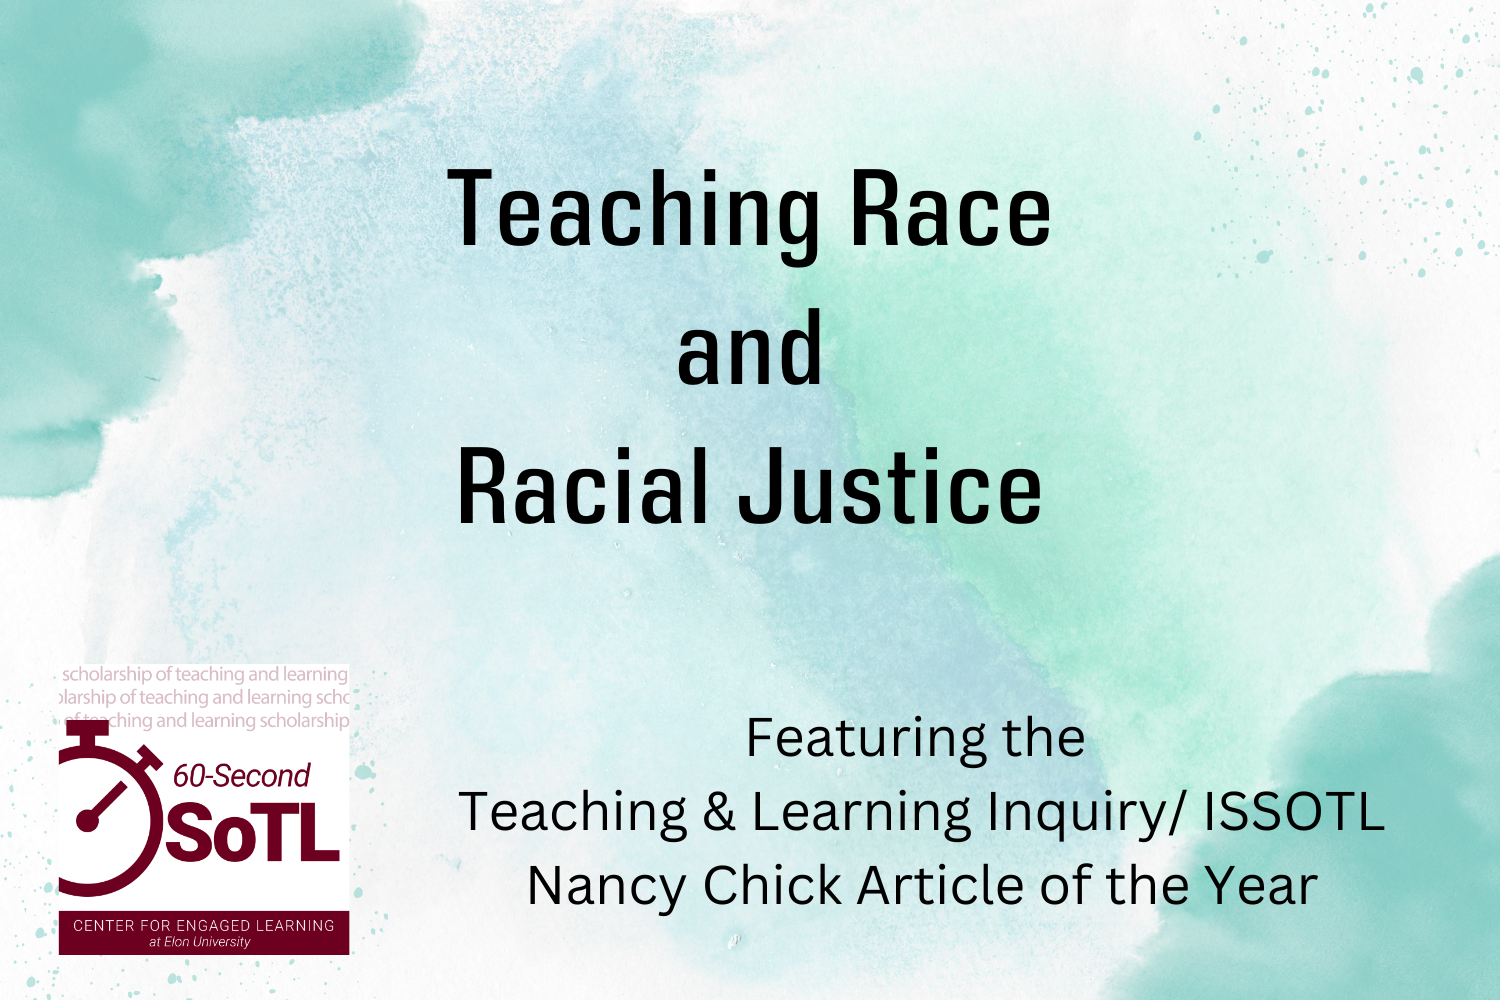 "Teaching Race and Racial Justice. Featuring the Teaching & Learning Inquiry / ISSOTL Nancy Chick Article of the Year"